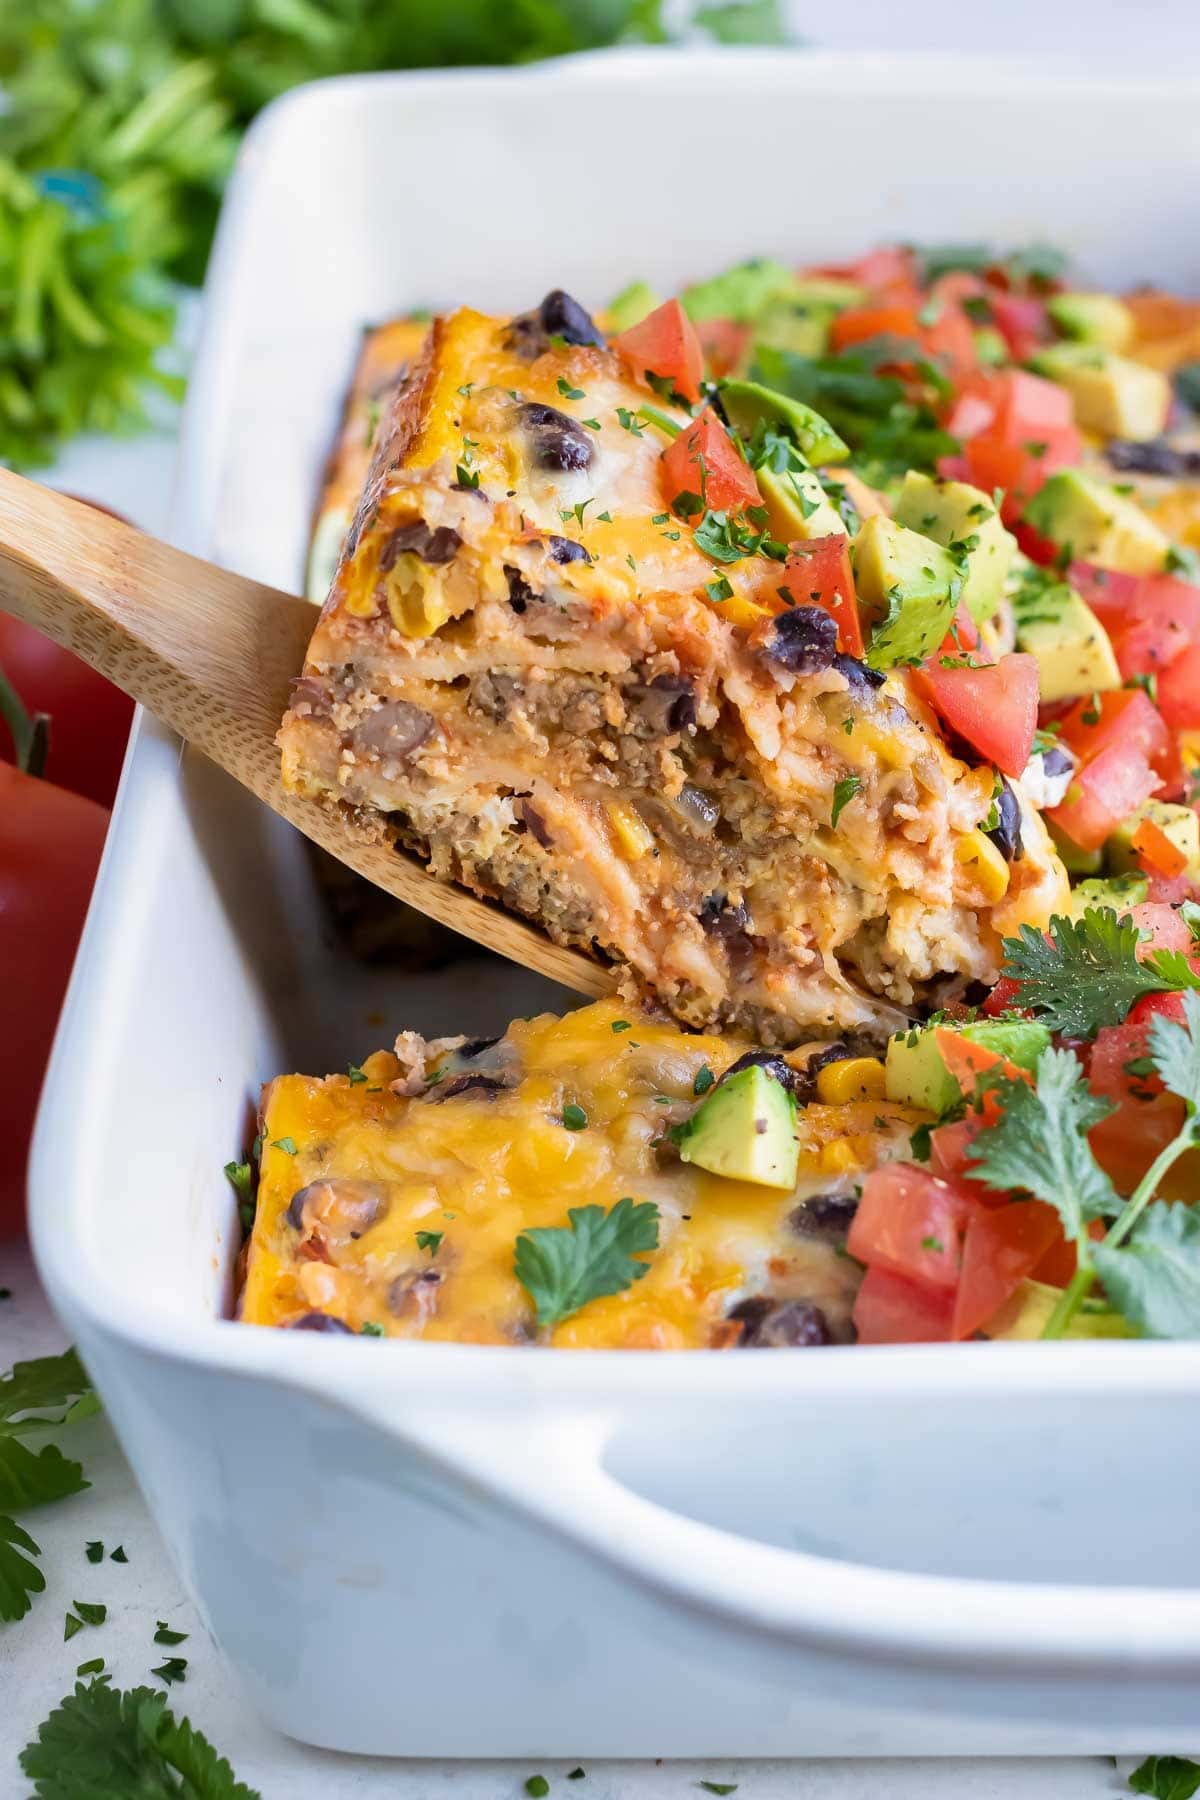 Mexican breakfast casserole made with black beans, fresh veggies, meat and eggs. 